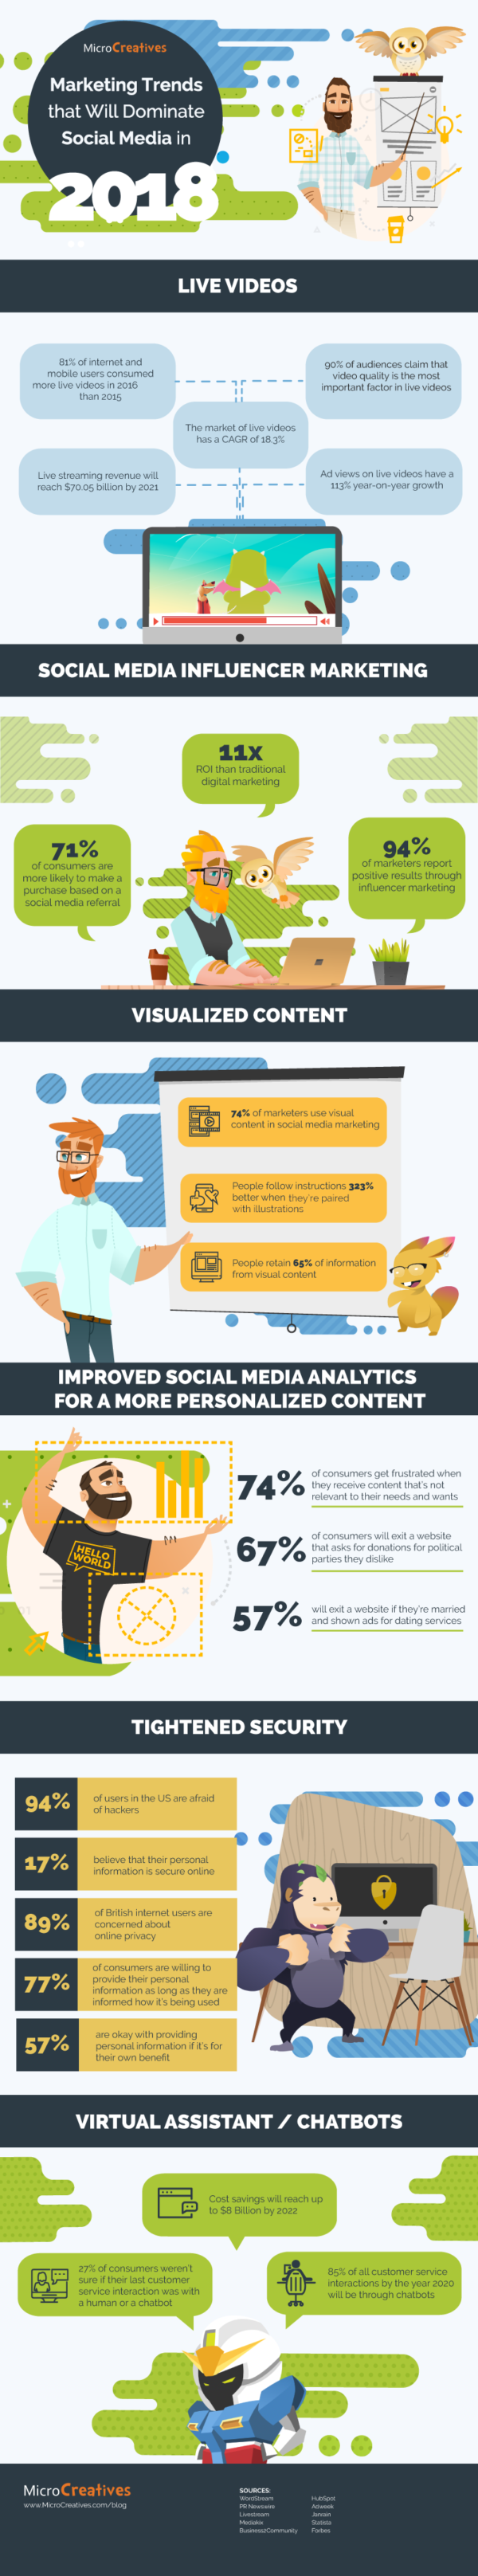 Marketing Trends That Will Dominate Social Media In 2018 - #infographic